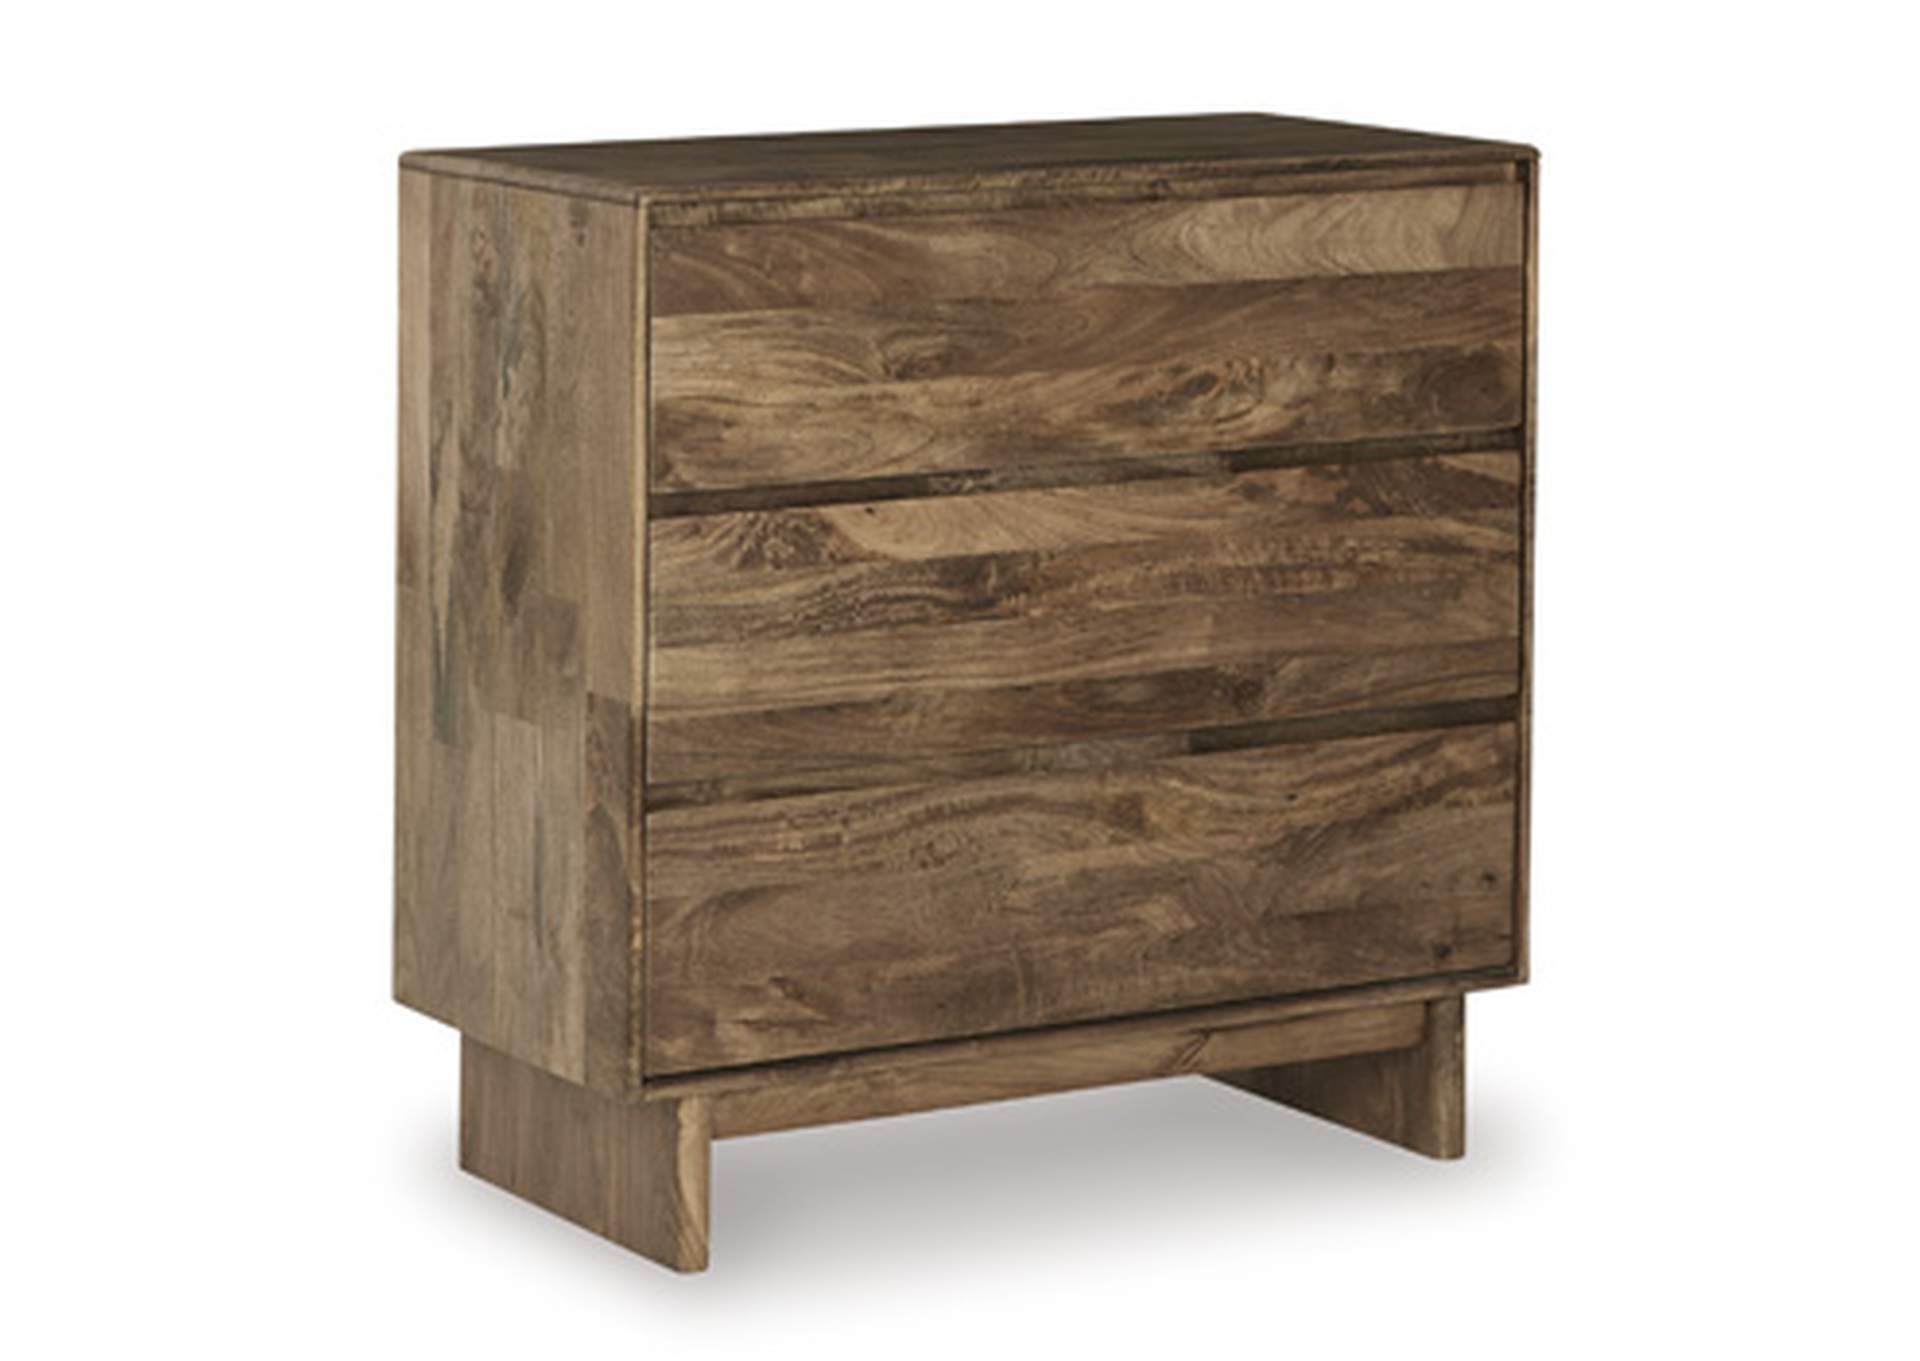 Isanti Chest of Drawers,Millennium